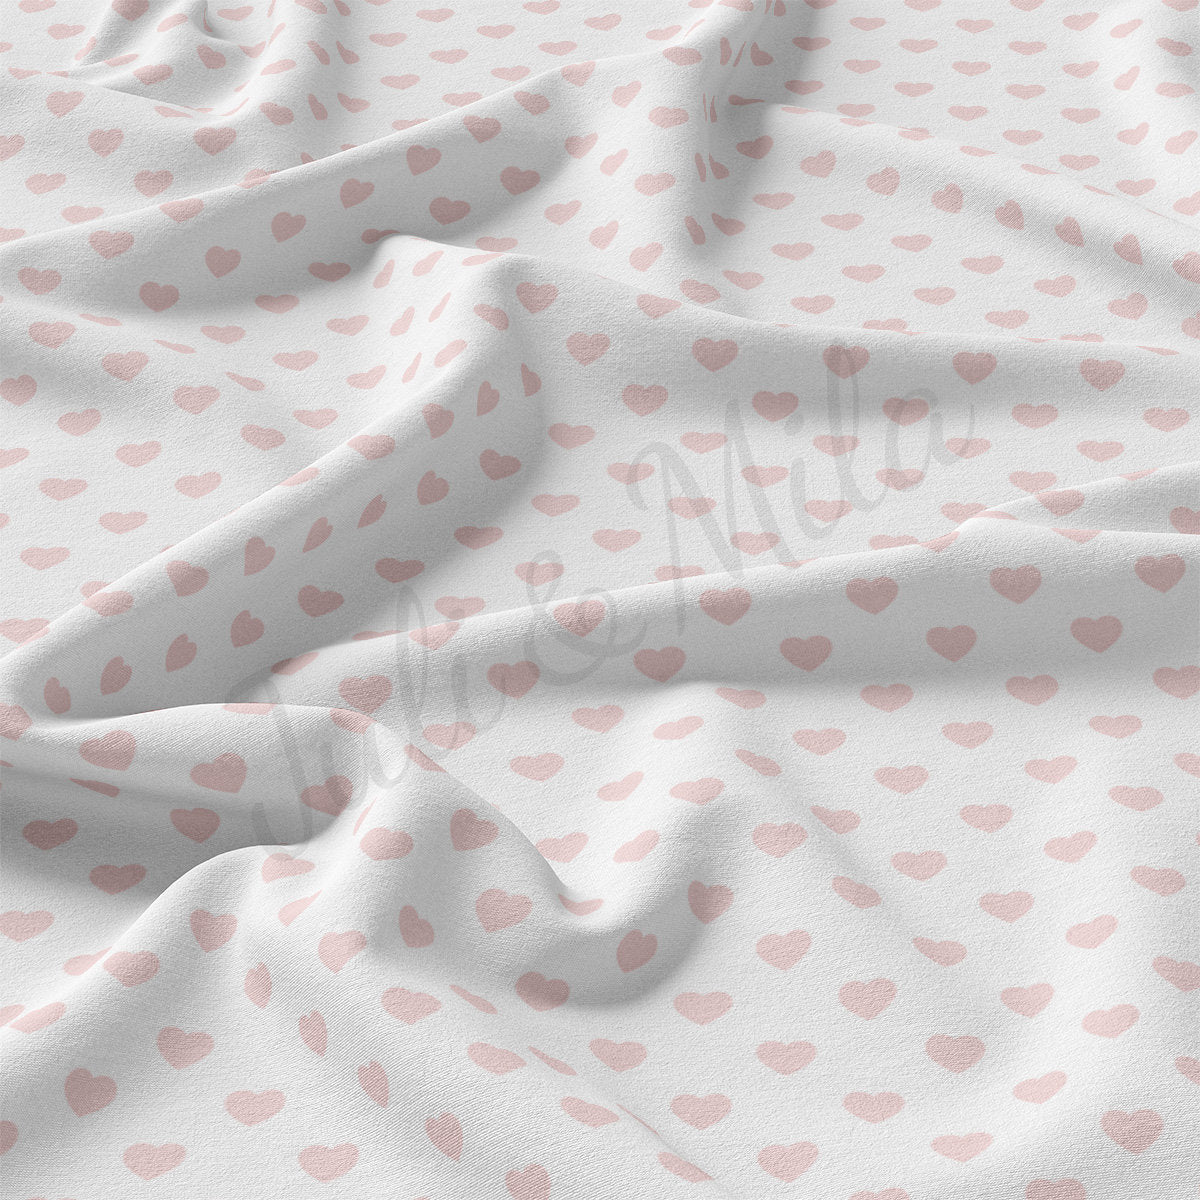 DBP Fabric Double Brushed Polyester DBP2446 Valentine's Day